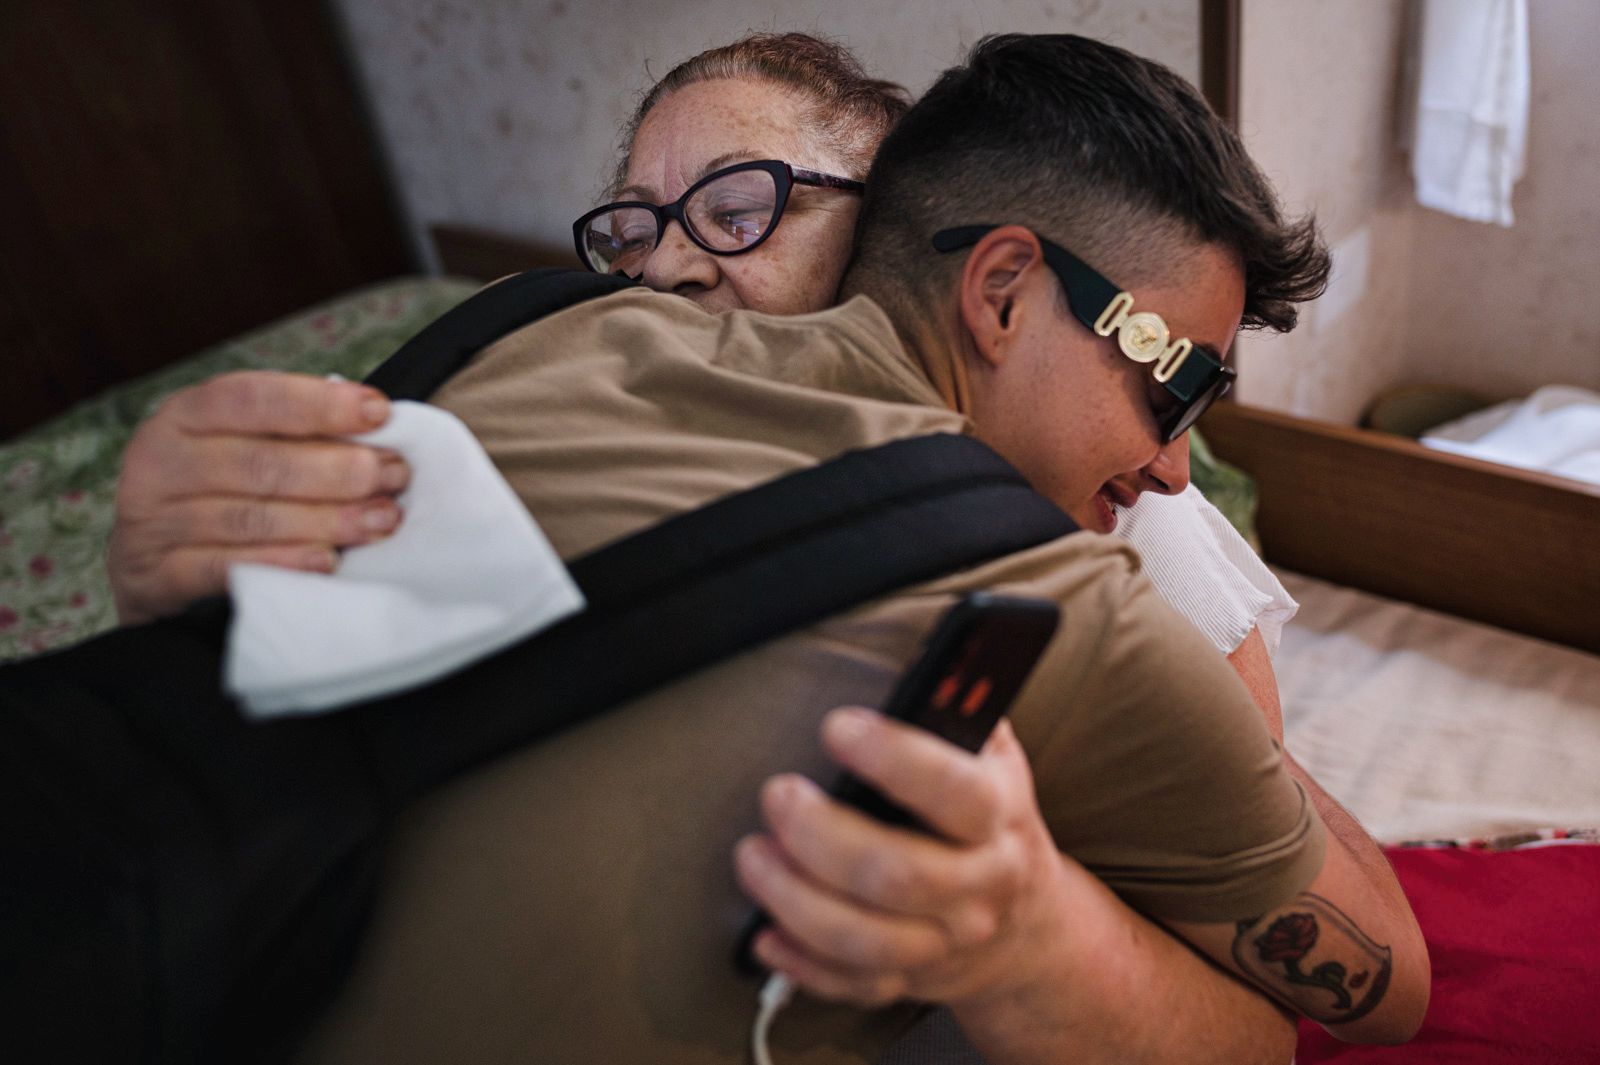 © Diana Bagnoli - Salvatore hugs his granmother in her house. They're are highly attached.